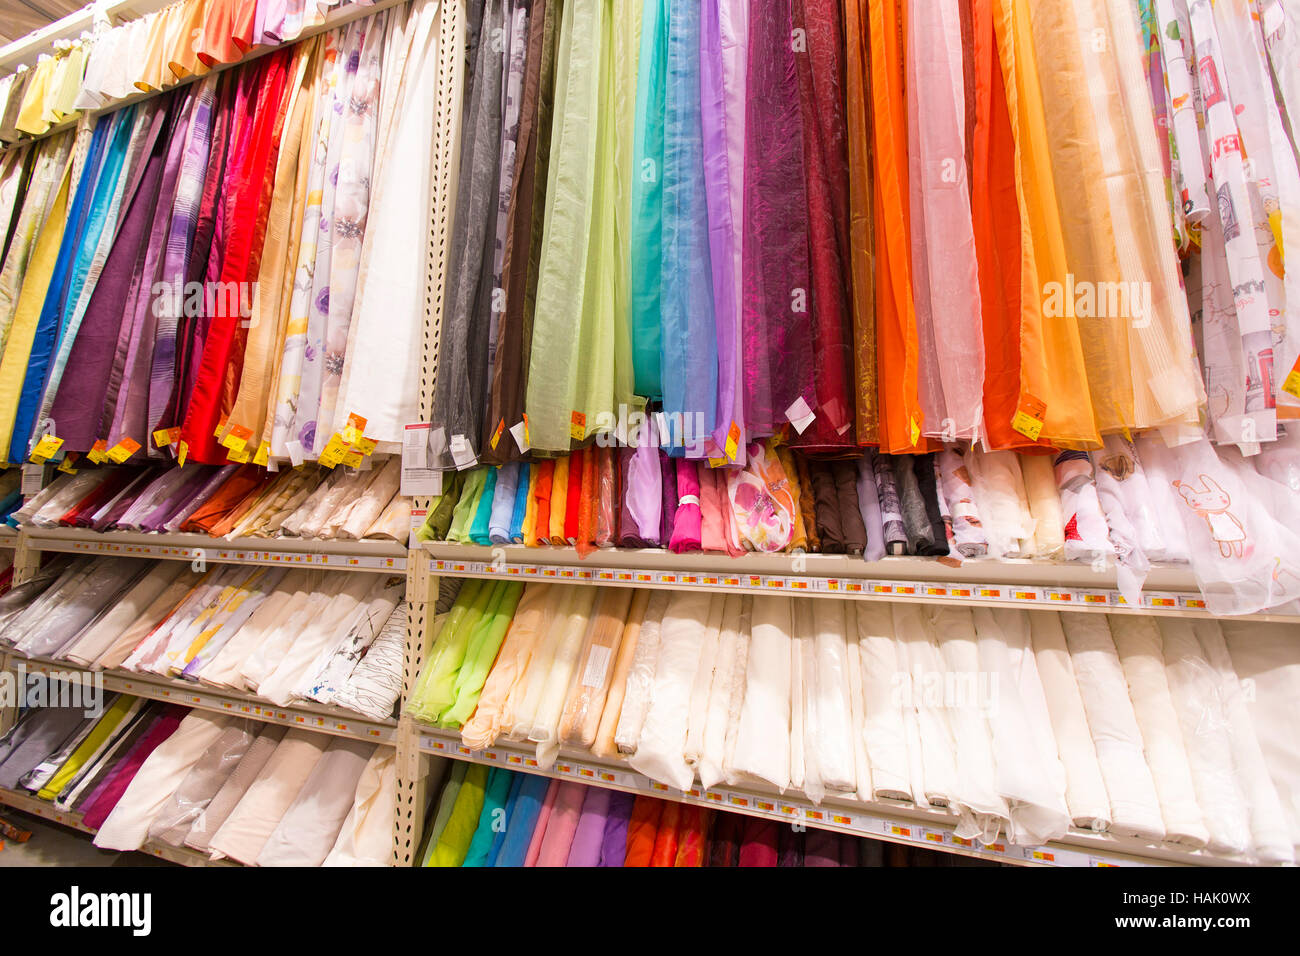 textiles for sale in fabric shop Stock Photo